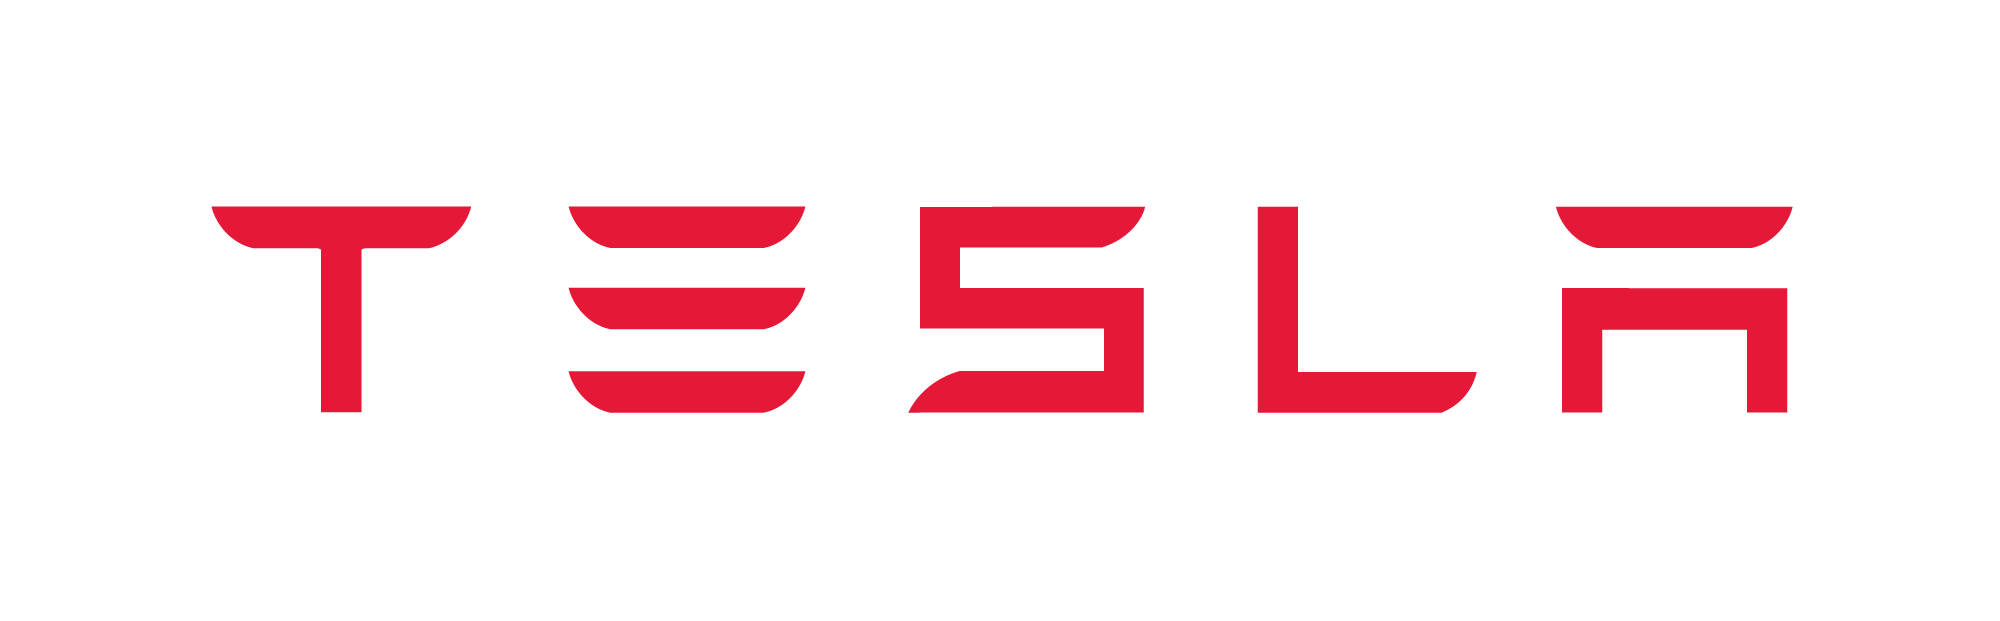 Tesla announces first quarter 2021 financial results and webcast